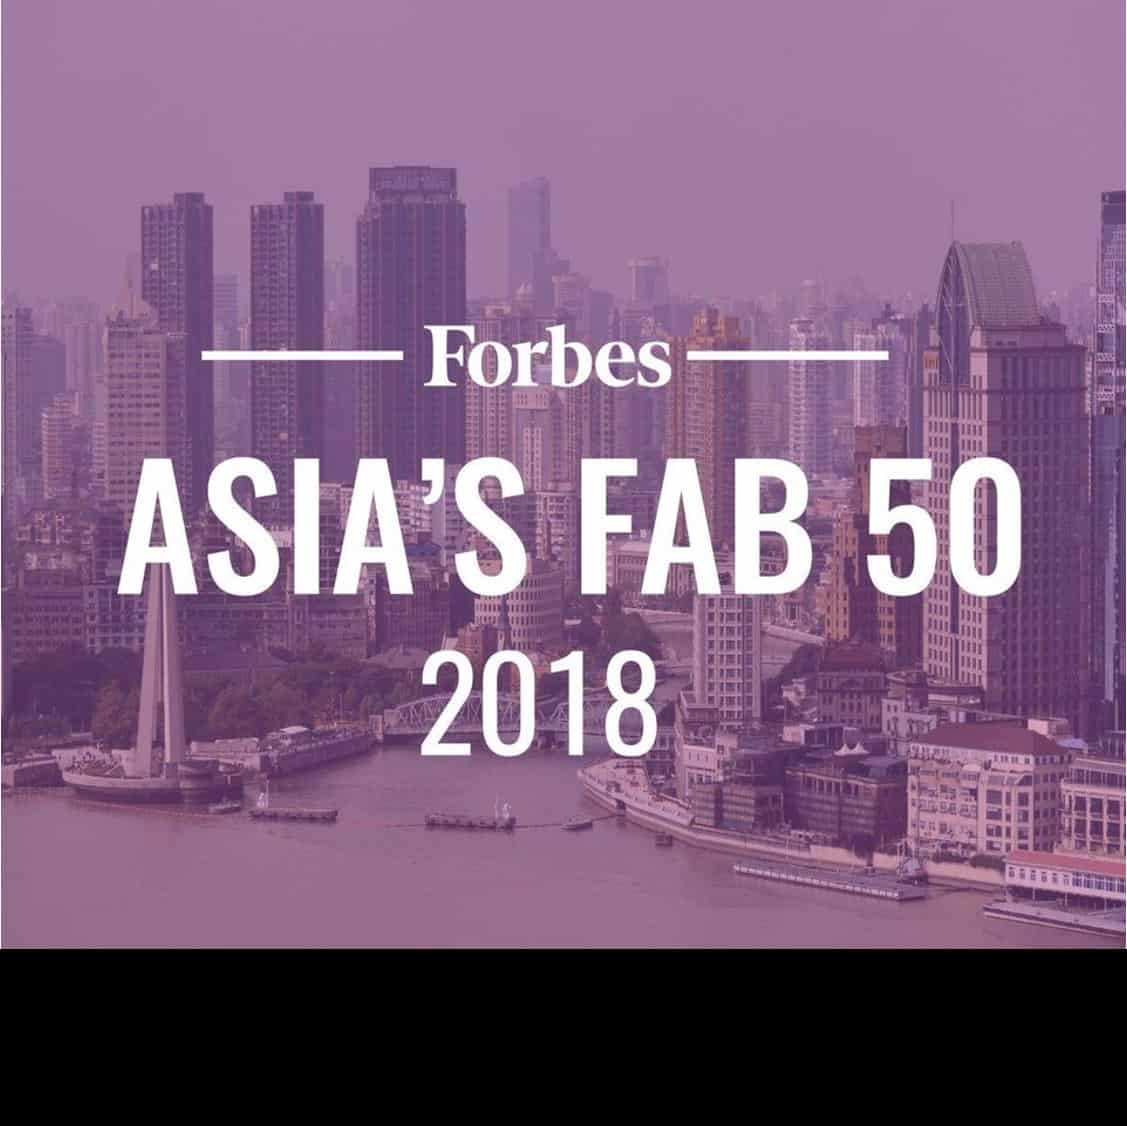 Vingroup and Mobile World Investment Corp. are among the top 50 listed companies in Asia Pacific